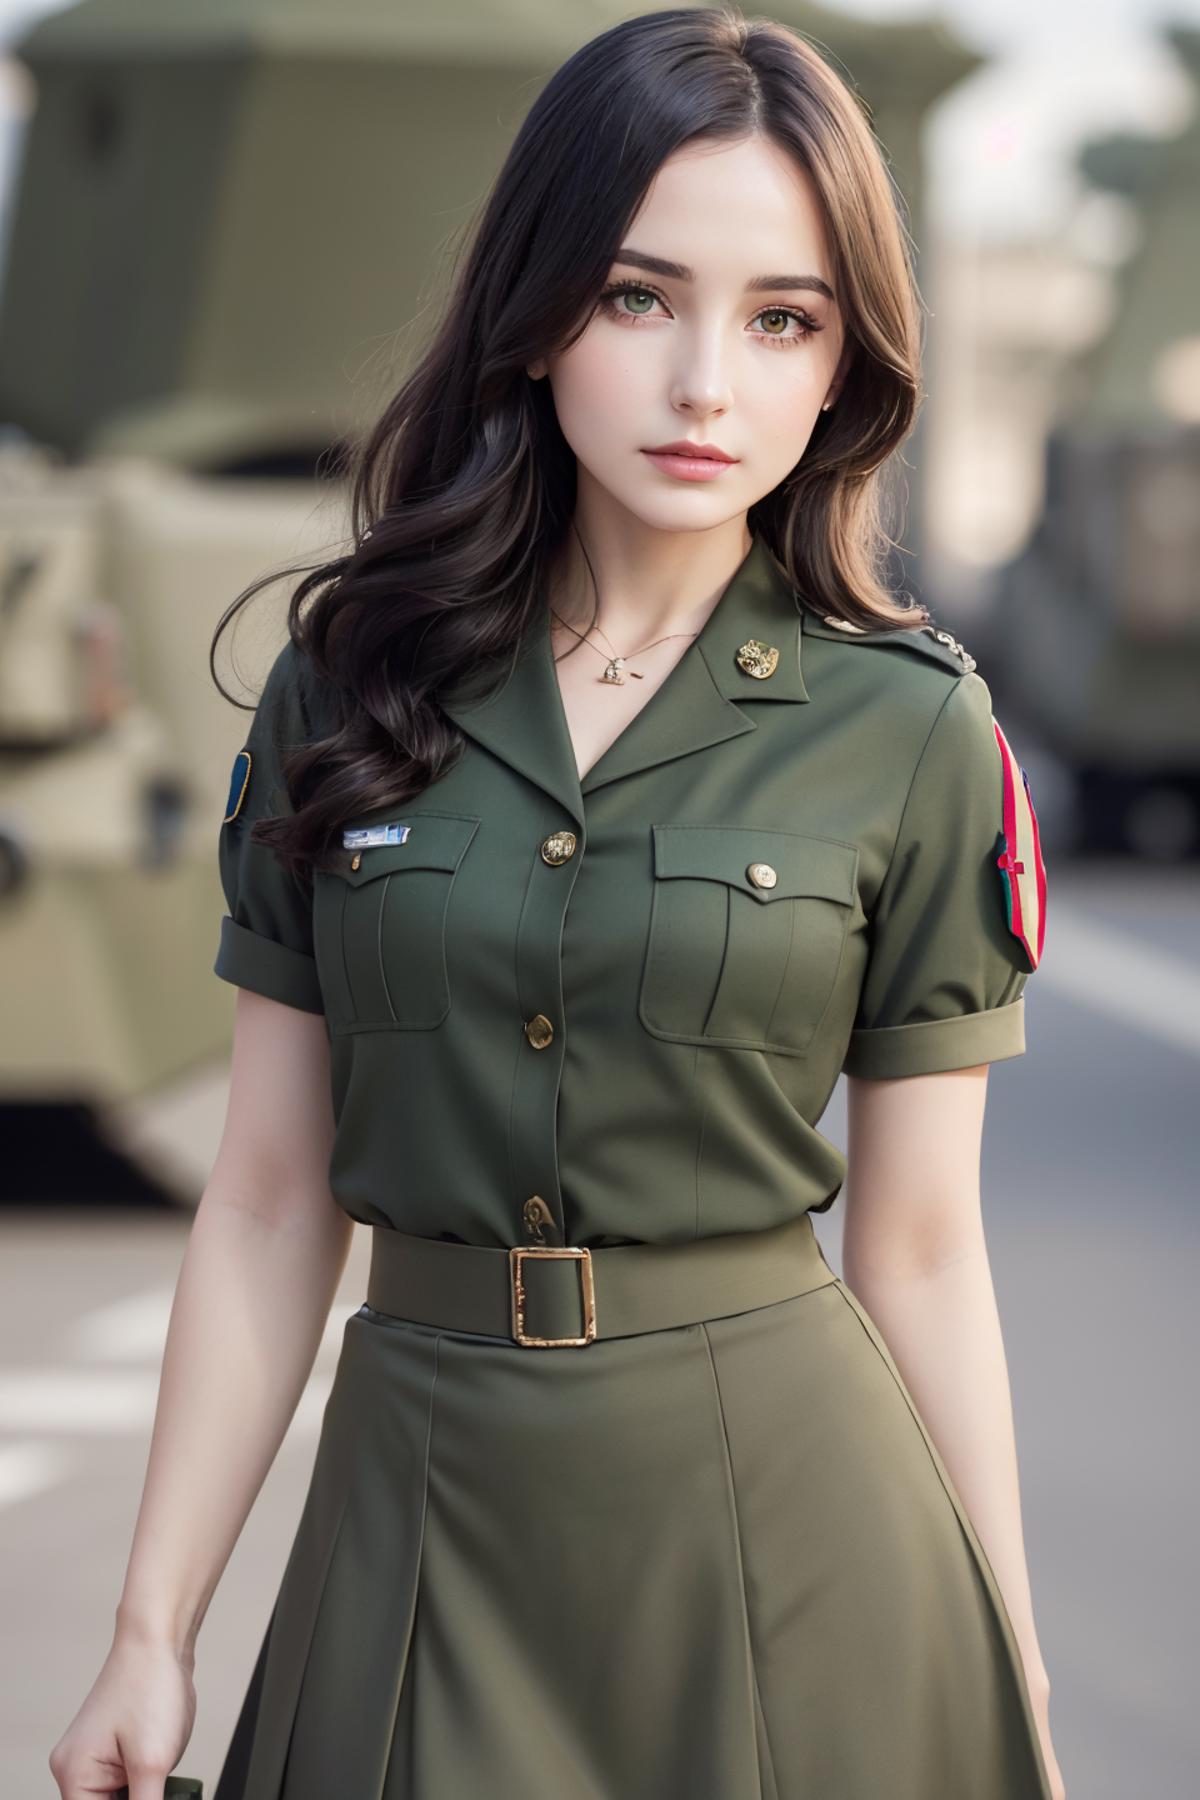 AI model image by gama_36